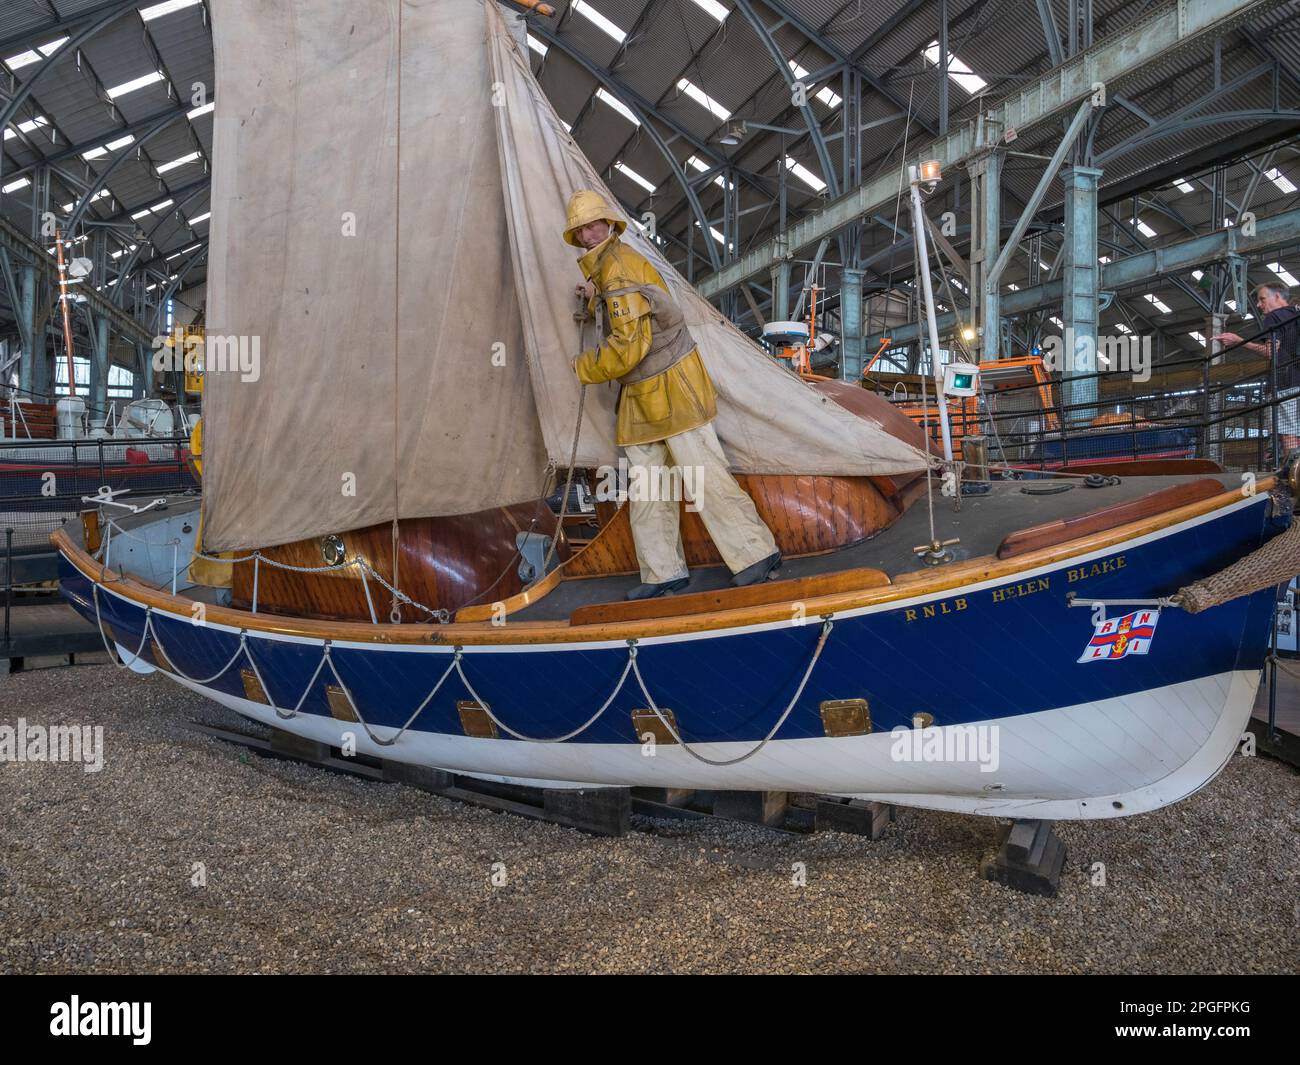 The 'Helen Blake', a Harbour type lifeboat in the RNLI Historic Lifeboat Collection, Historic Dockyard Chatham, Kent, UK. Stock Photo